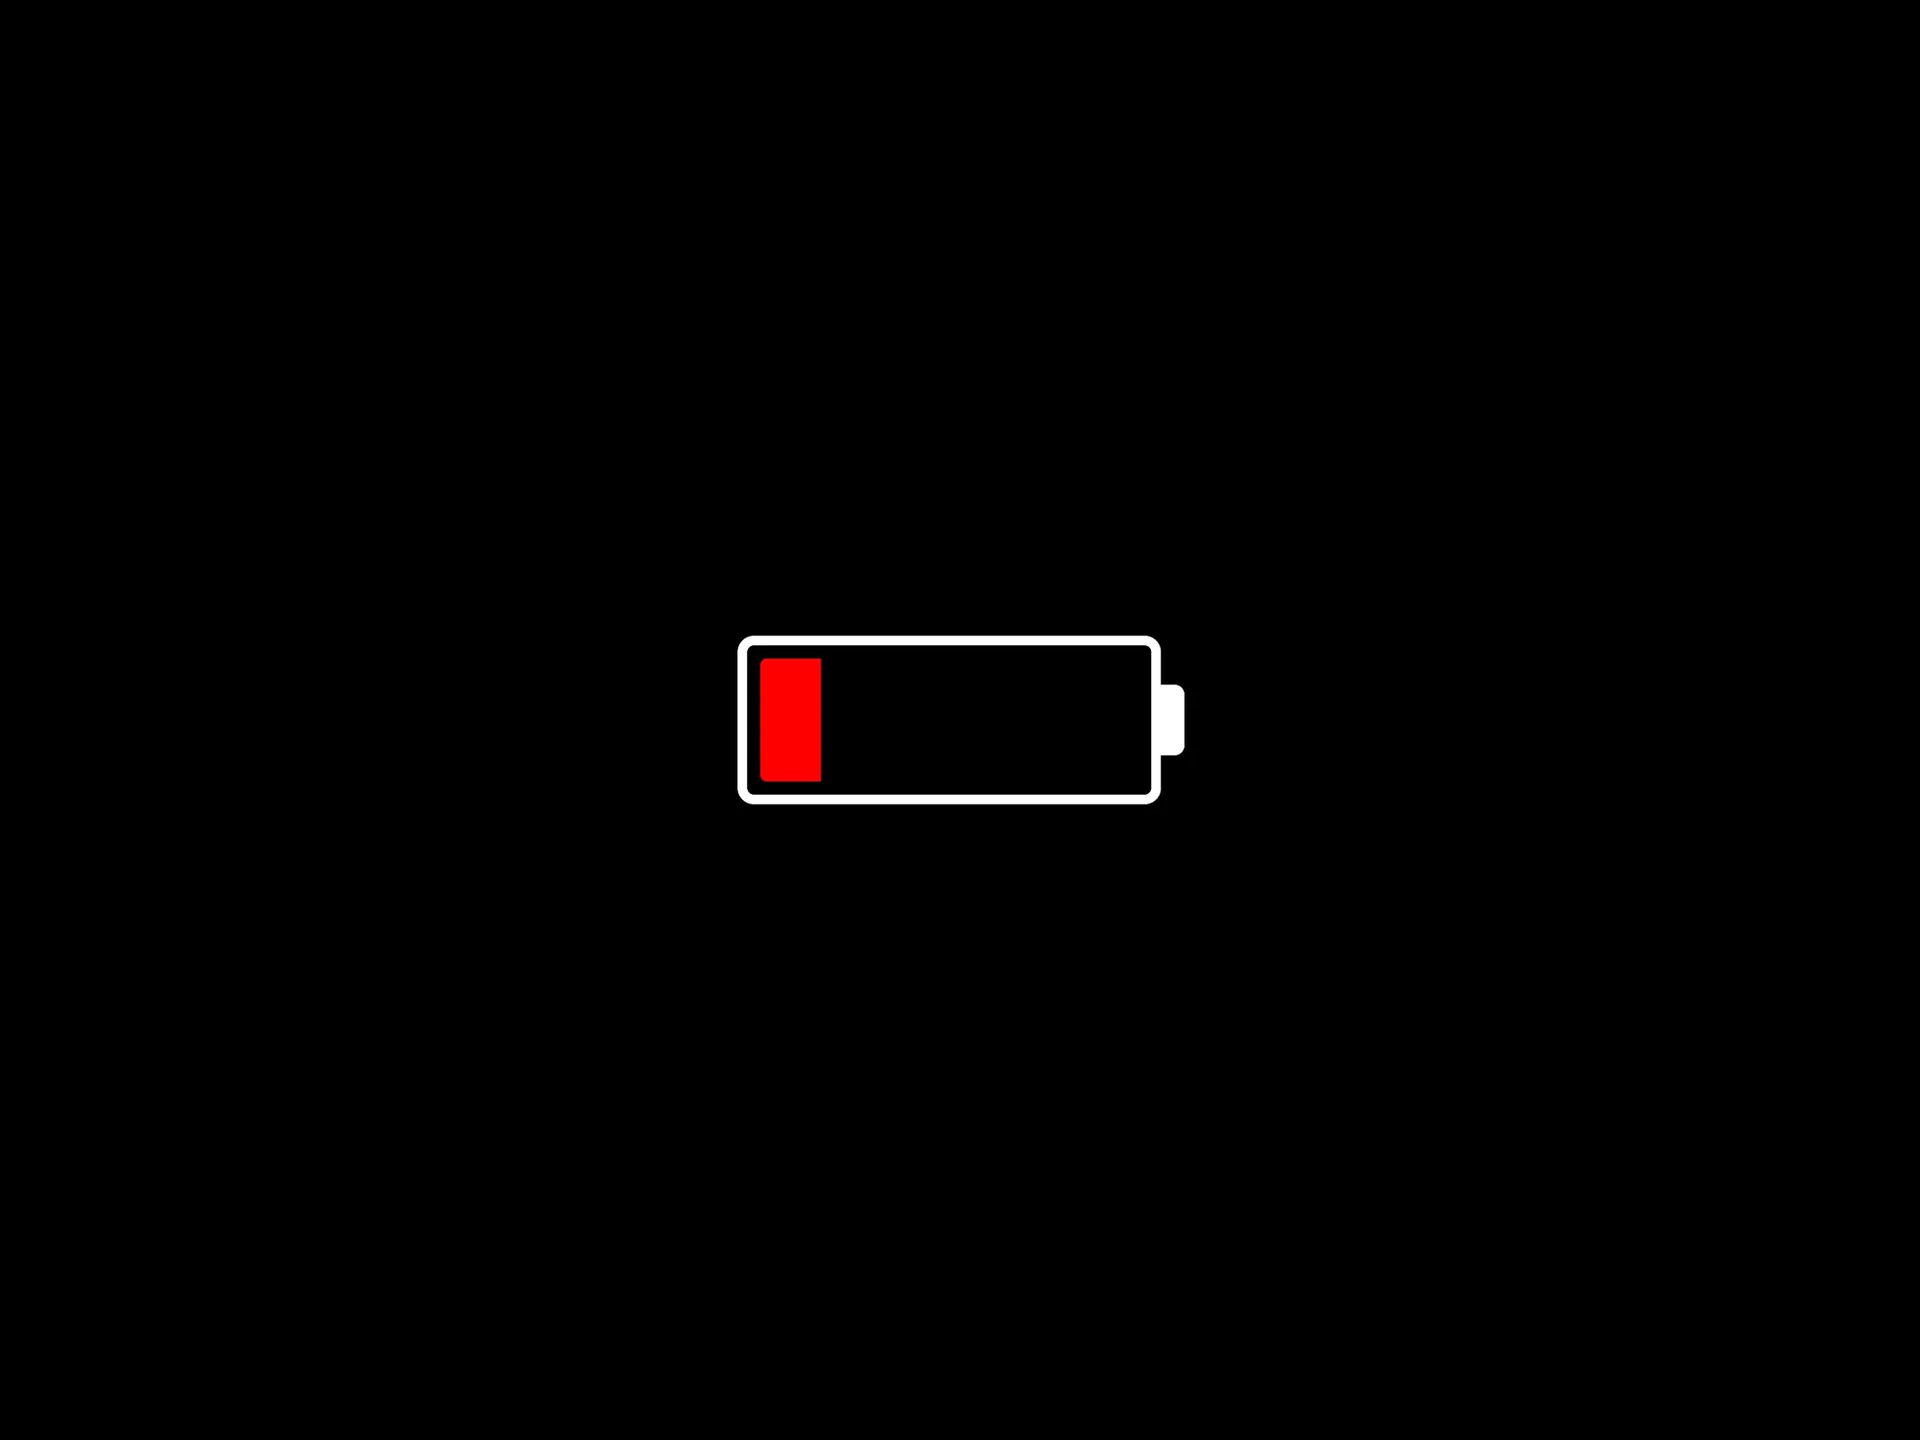 Today, we are covering how to turn off low power mode on iOS and Android, so you don't worry about functionalities being limited while your battery is low.